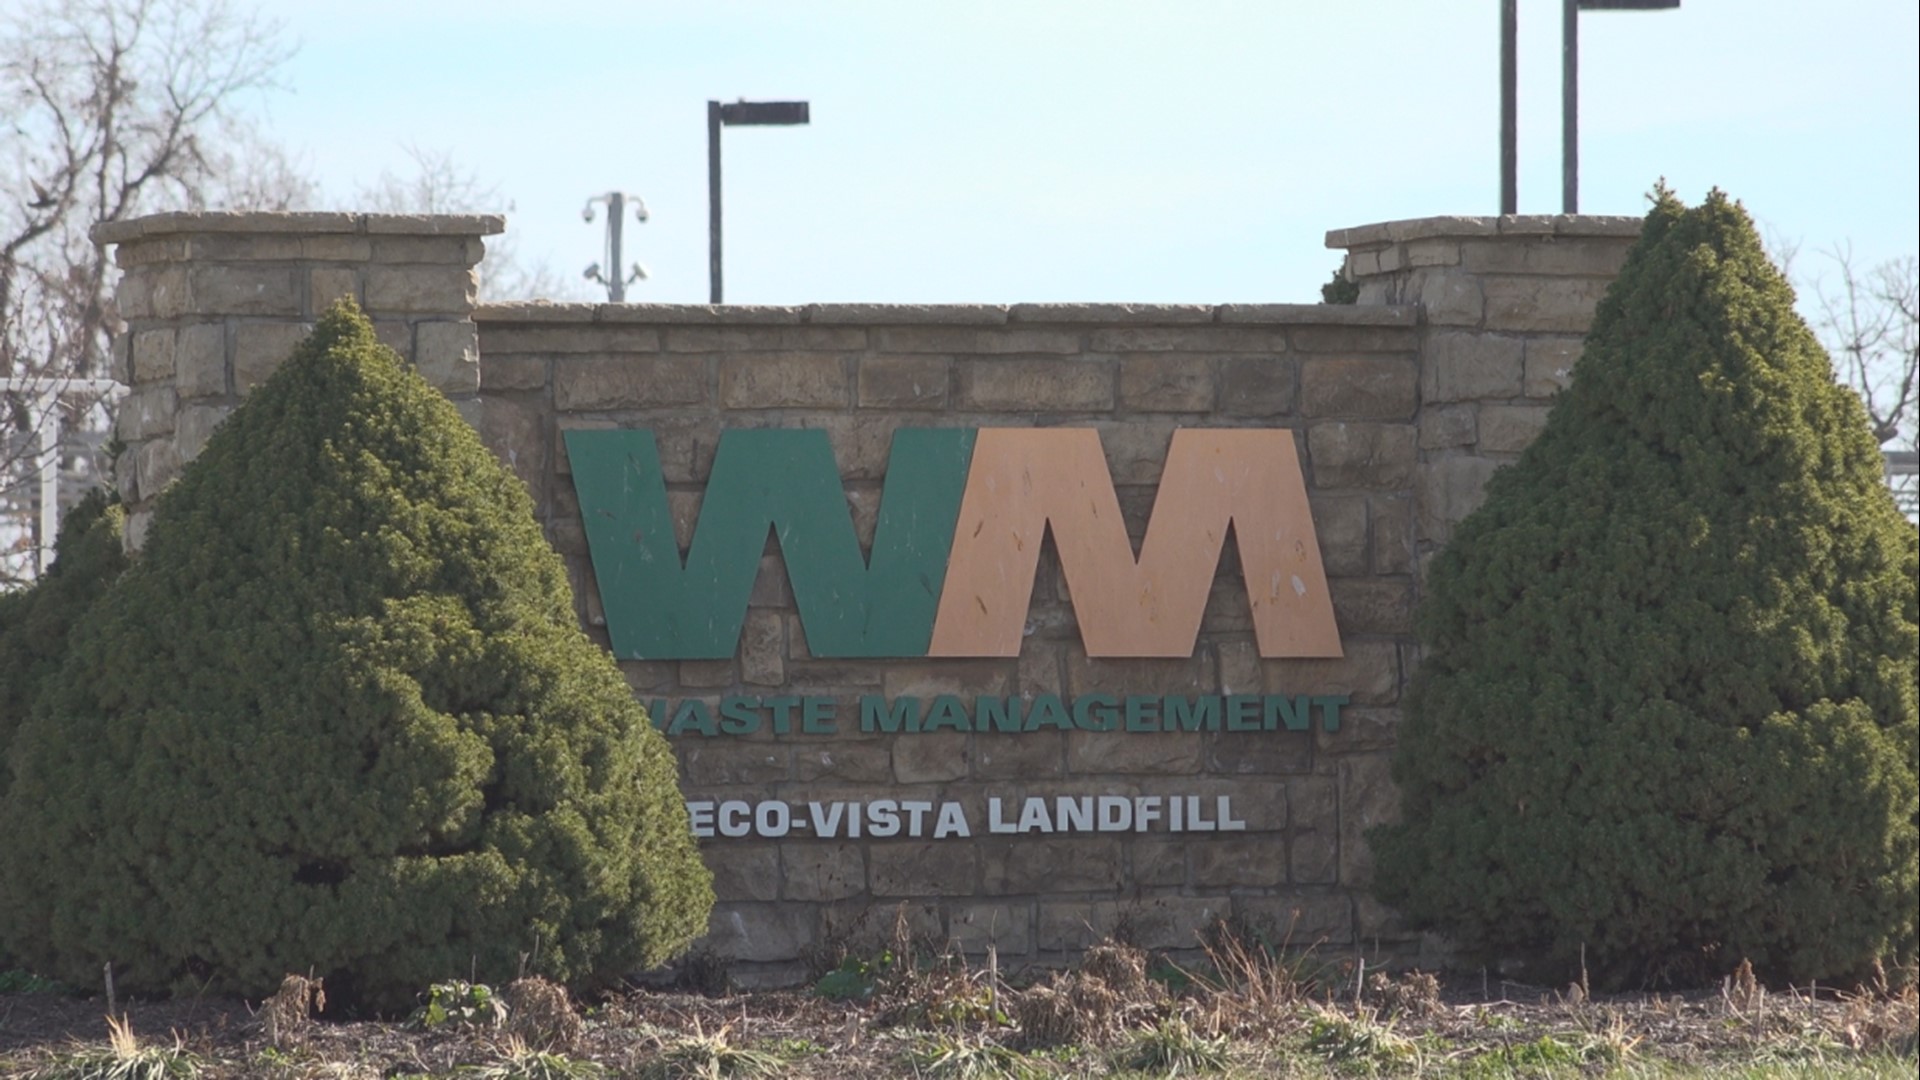 In a request filed to the state, the Eco Vista Landfill's operator says they need another ten acres.